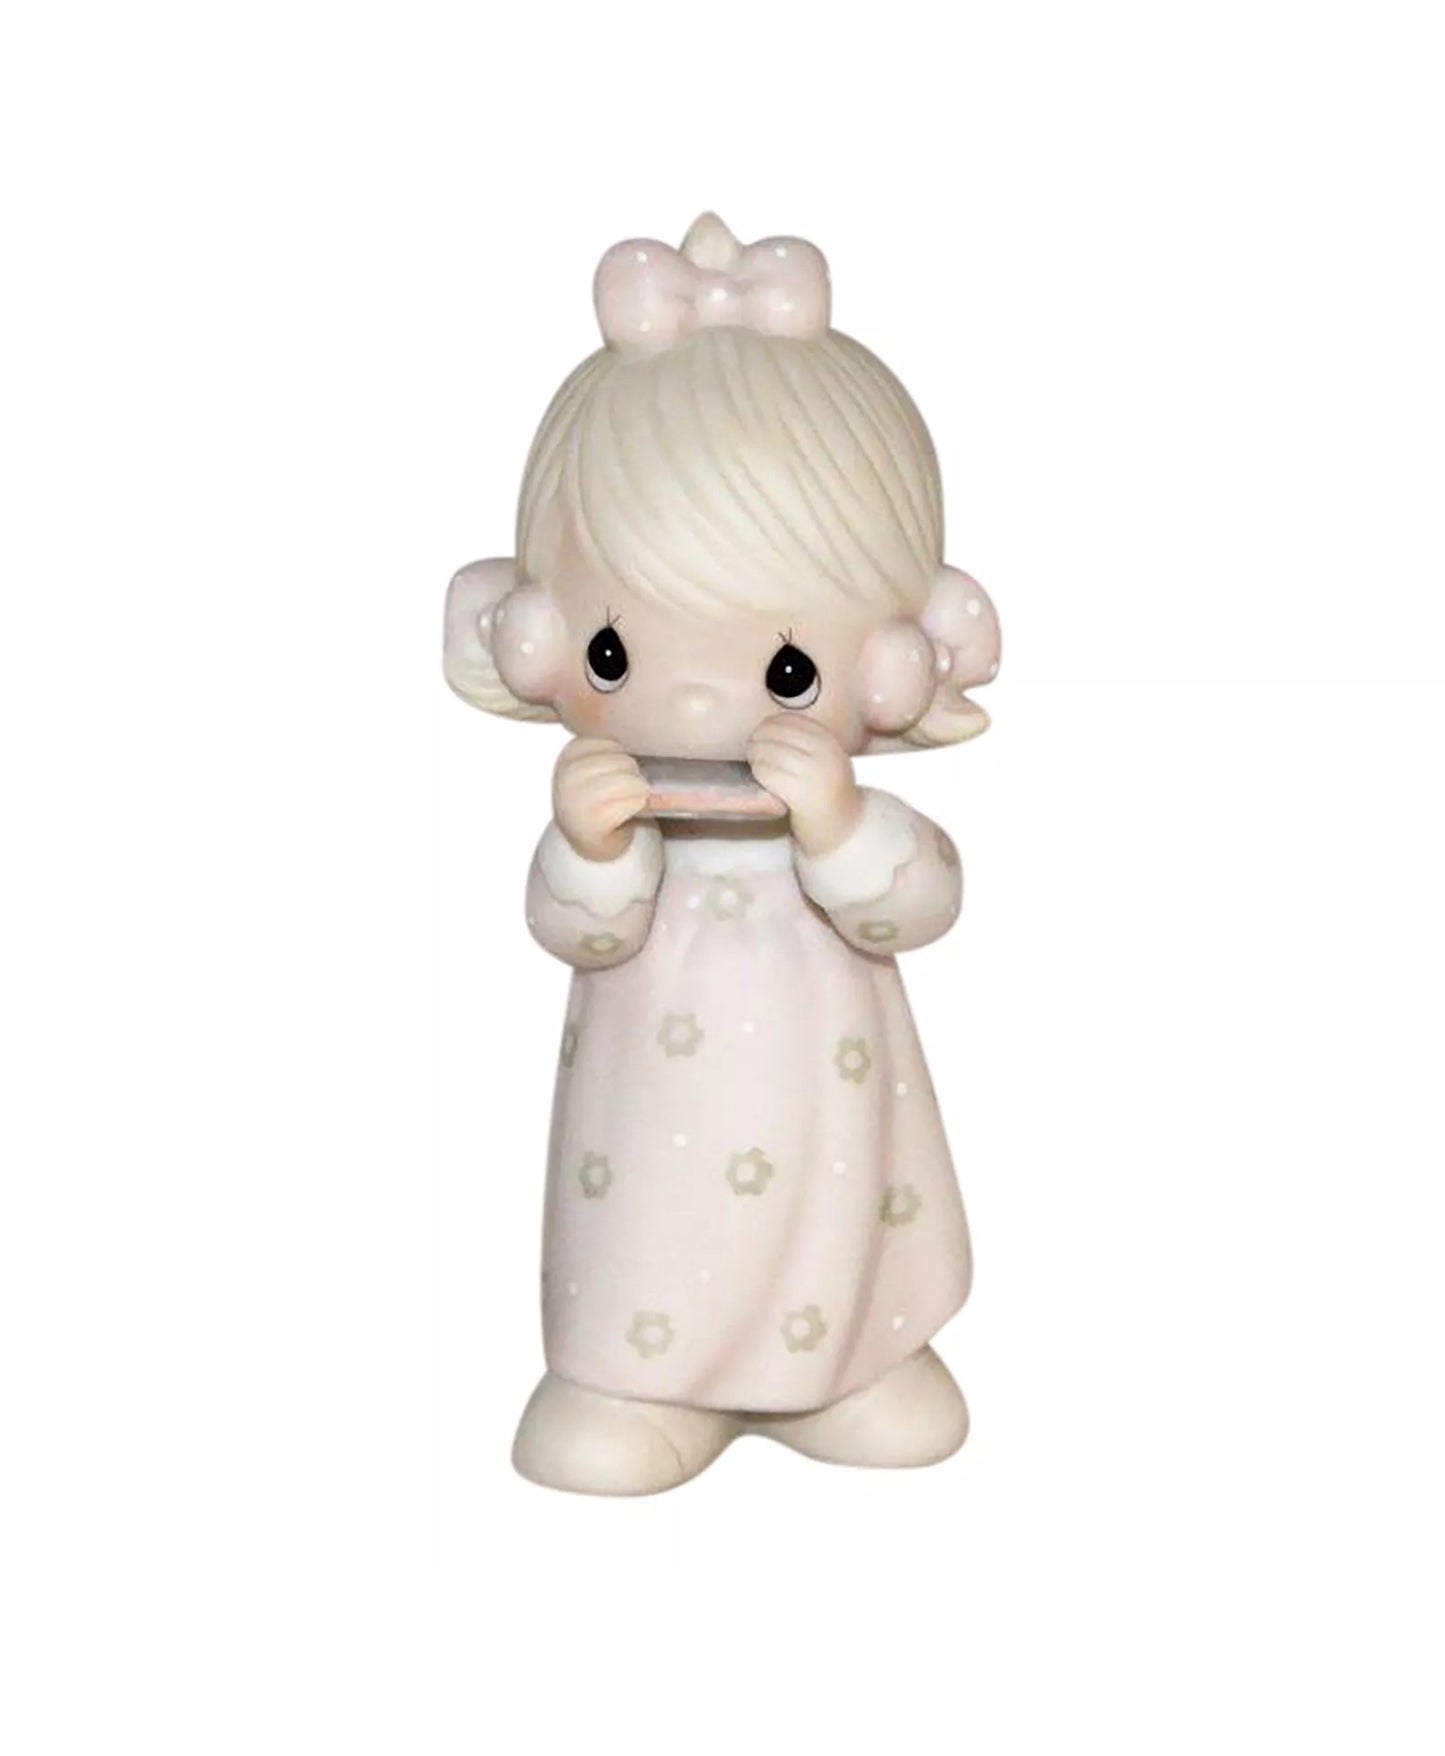 Lord Give Me A Song - Precious Moment Figurine